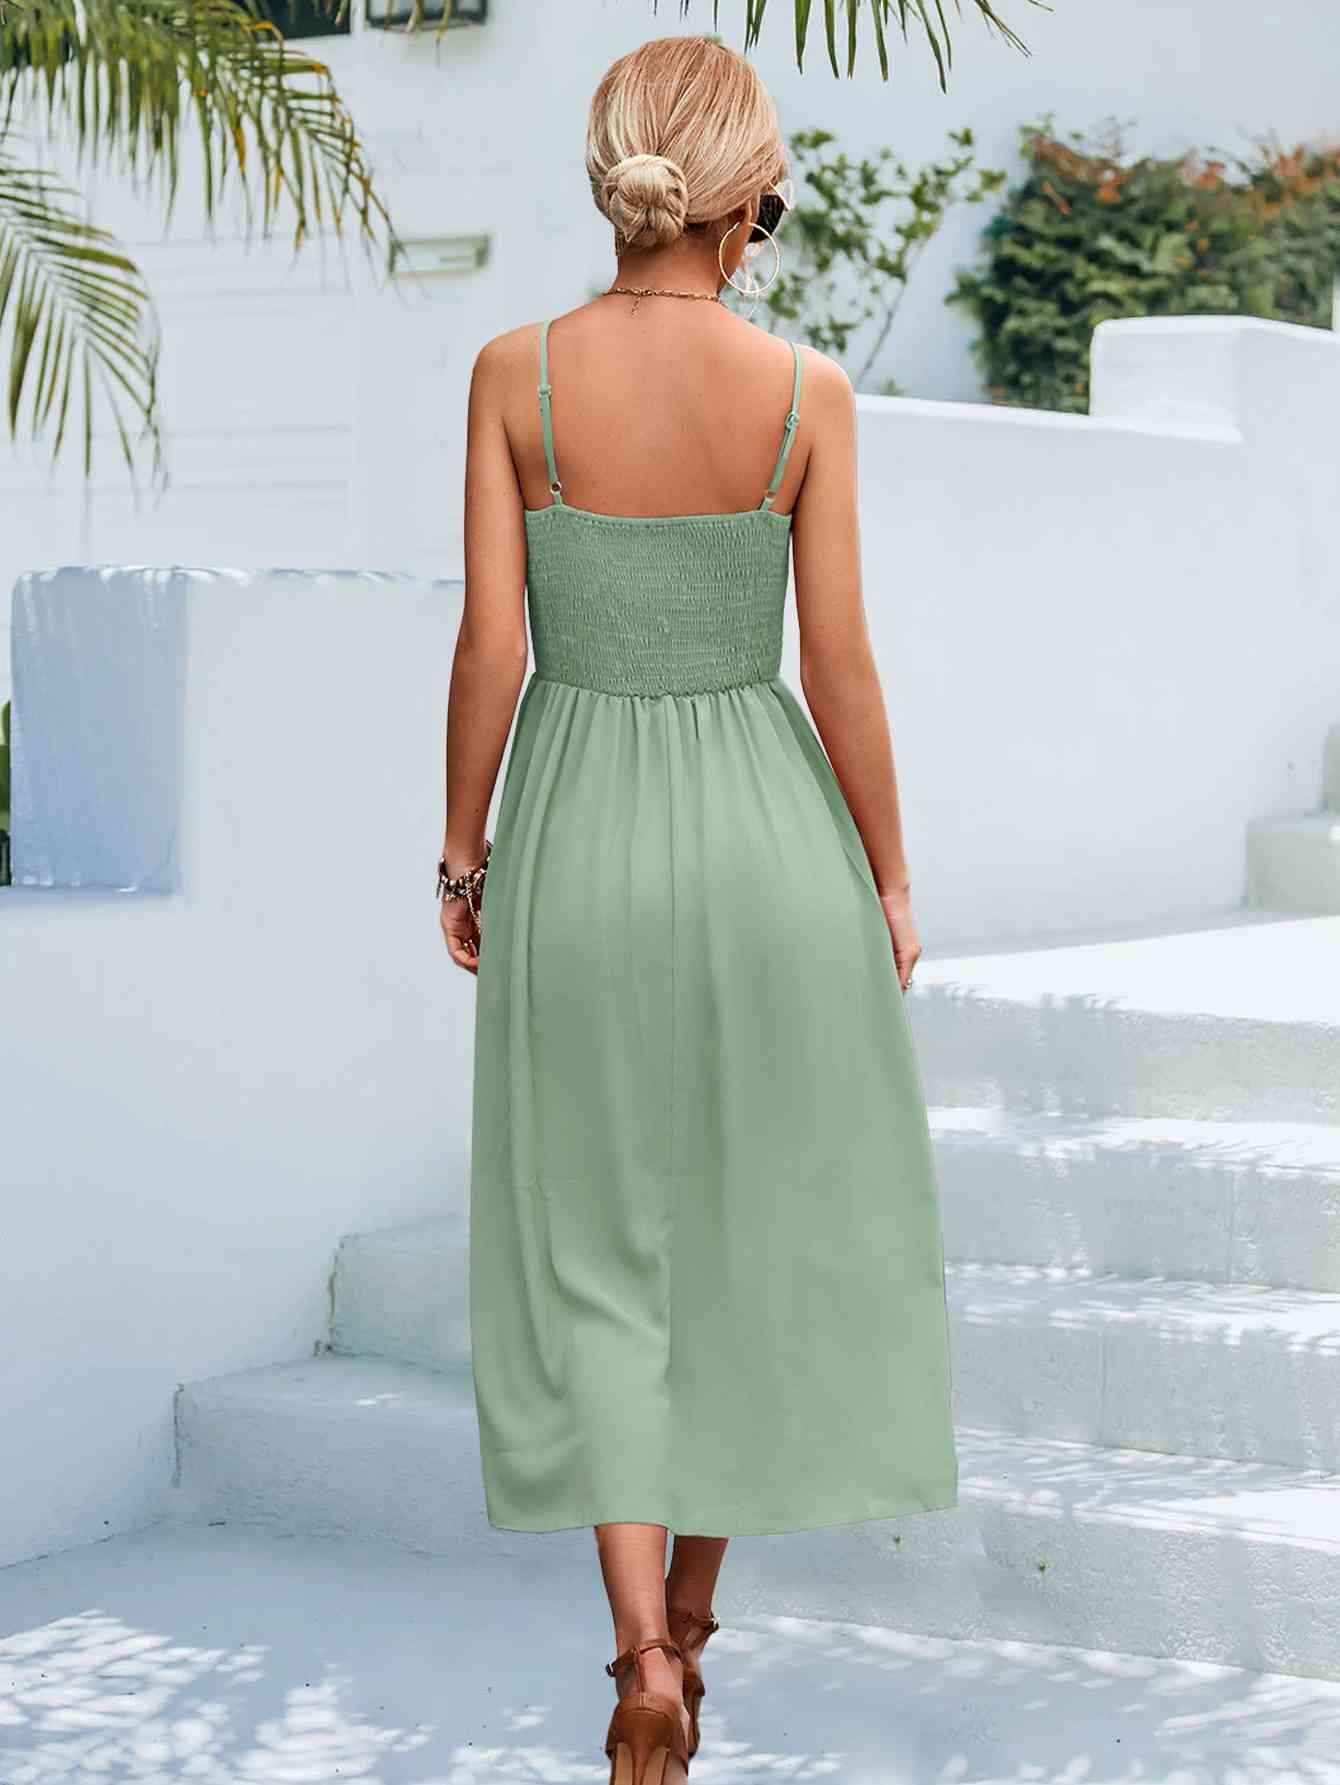 a woman in a green dress walking down some steps